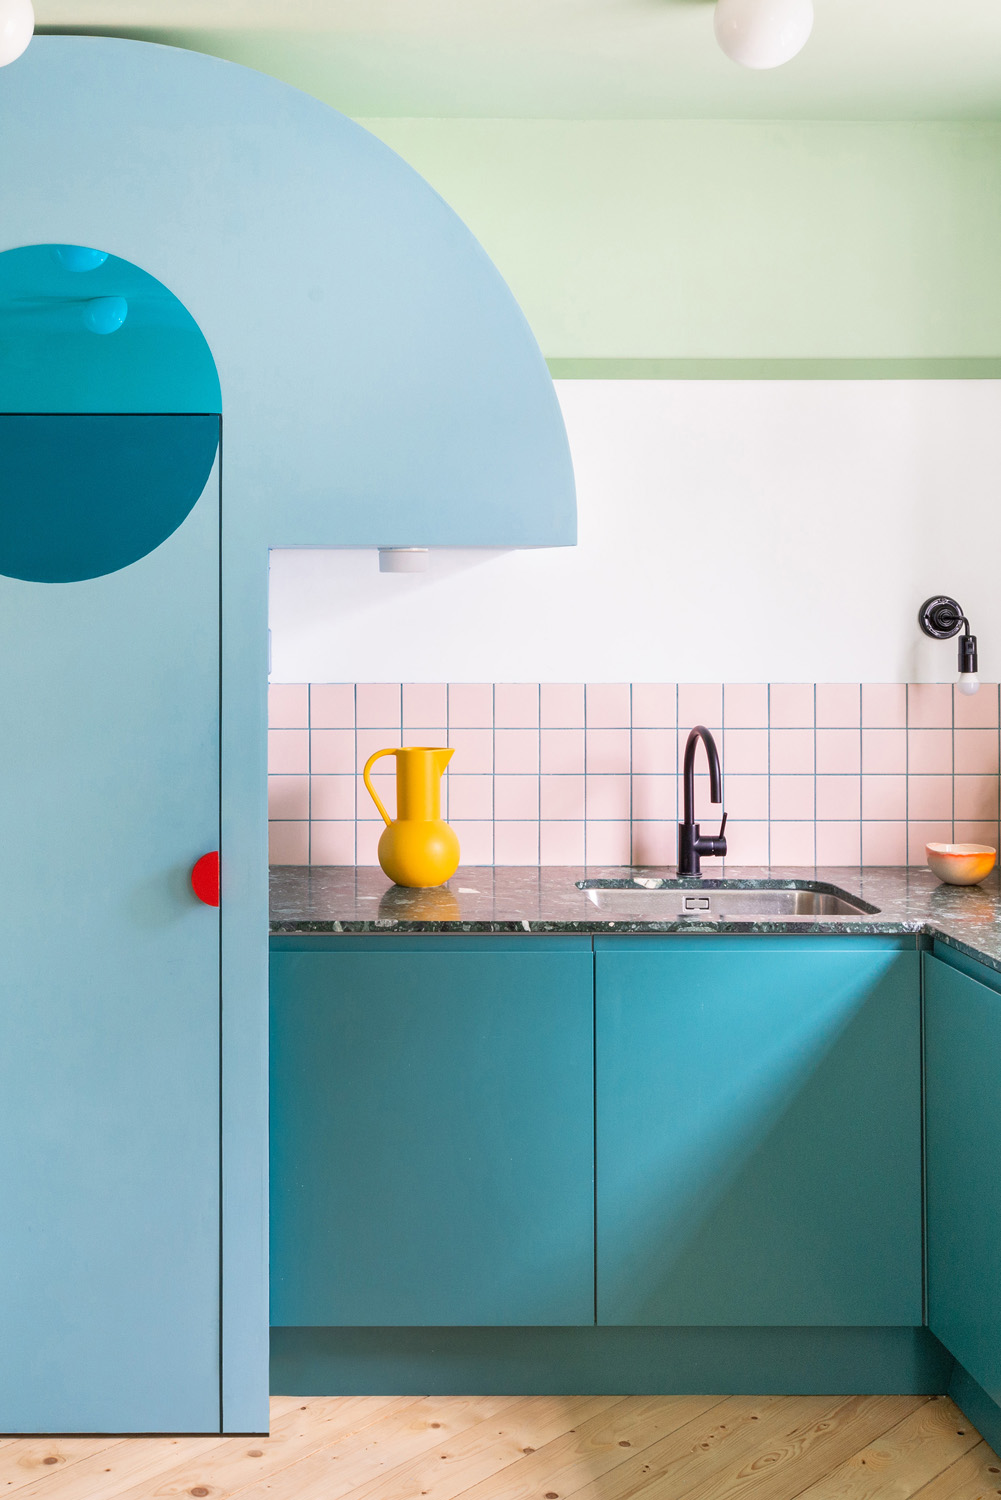 Blue kitchen by Office S&M - modern architecture and interior design studio in London